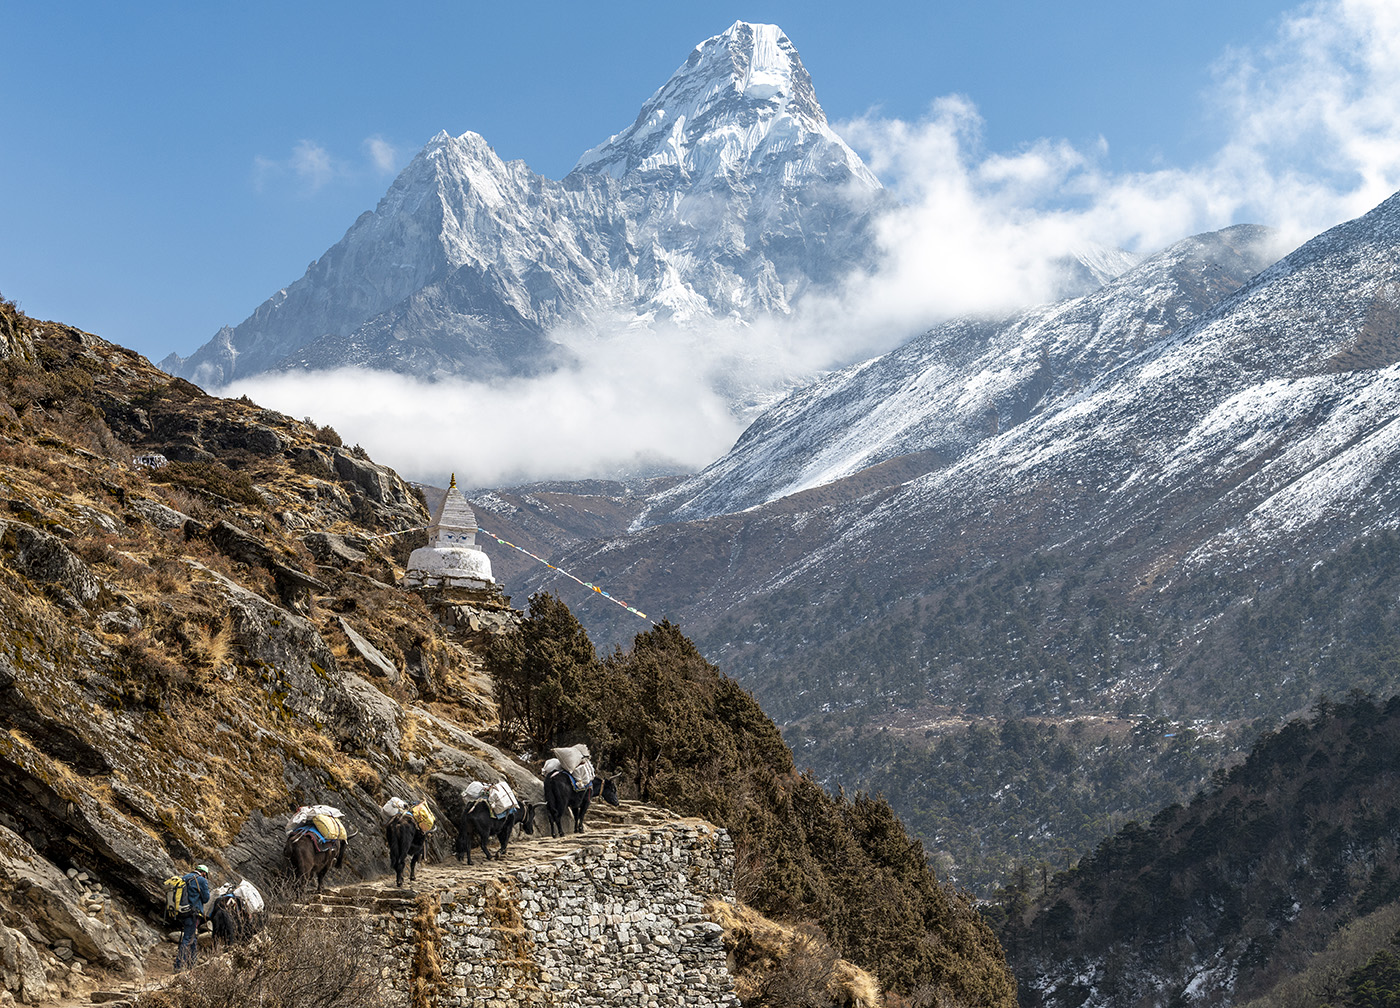 Honour For Yaks Carry Supplies Past Ama Dablam By Jefferey Mott